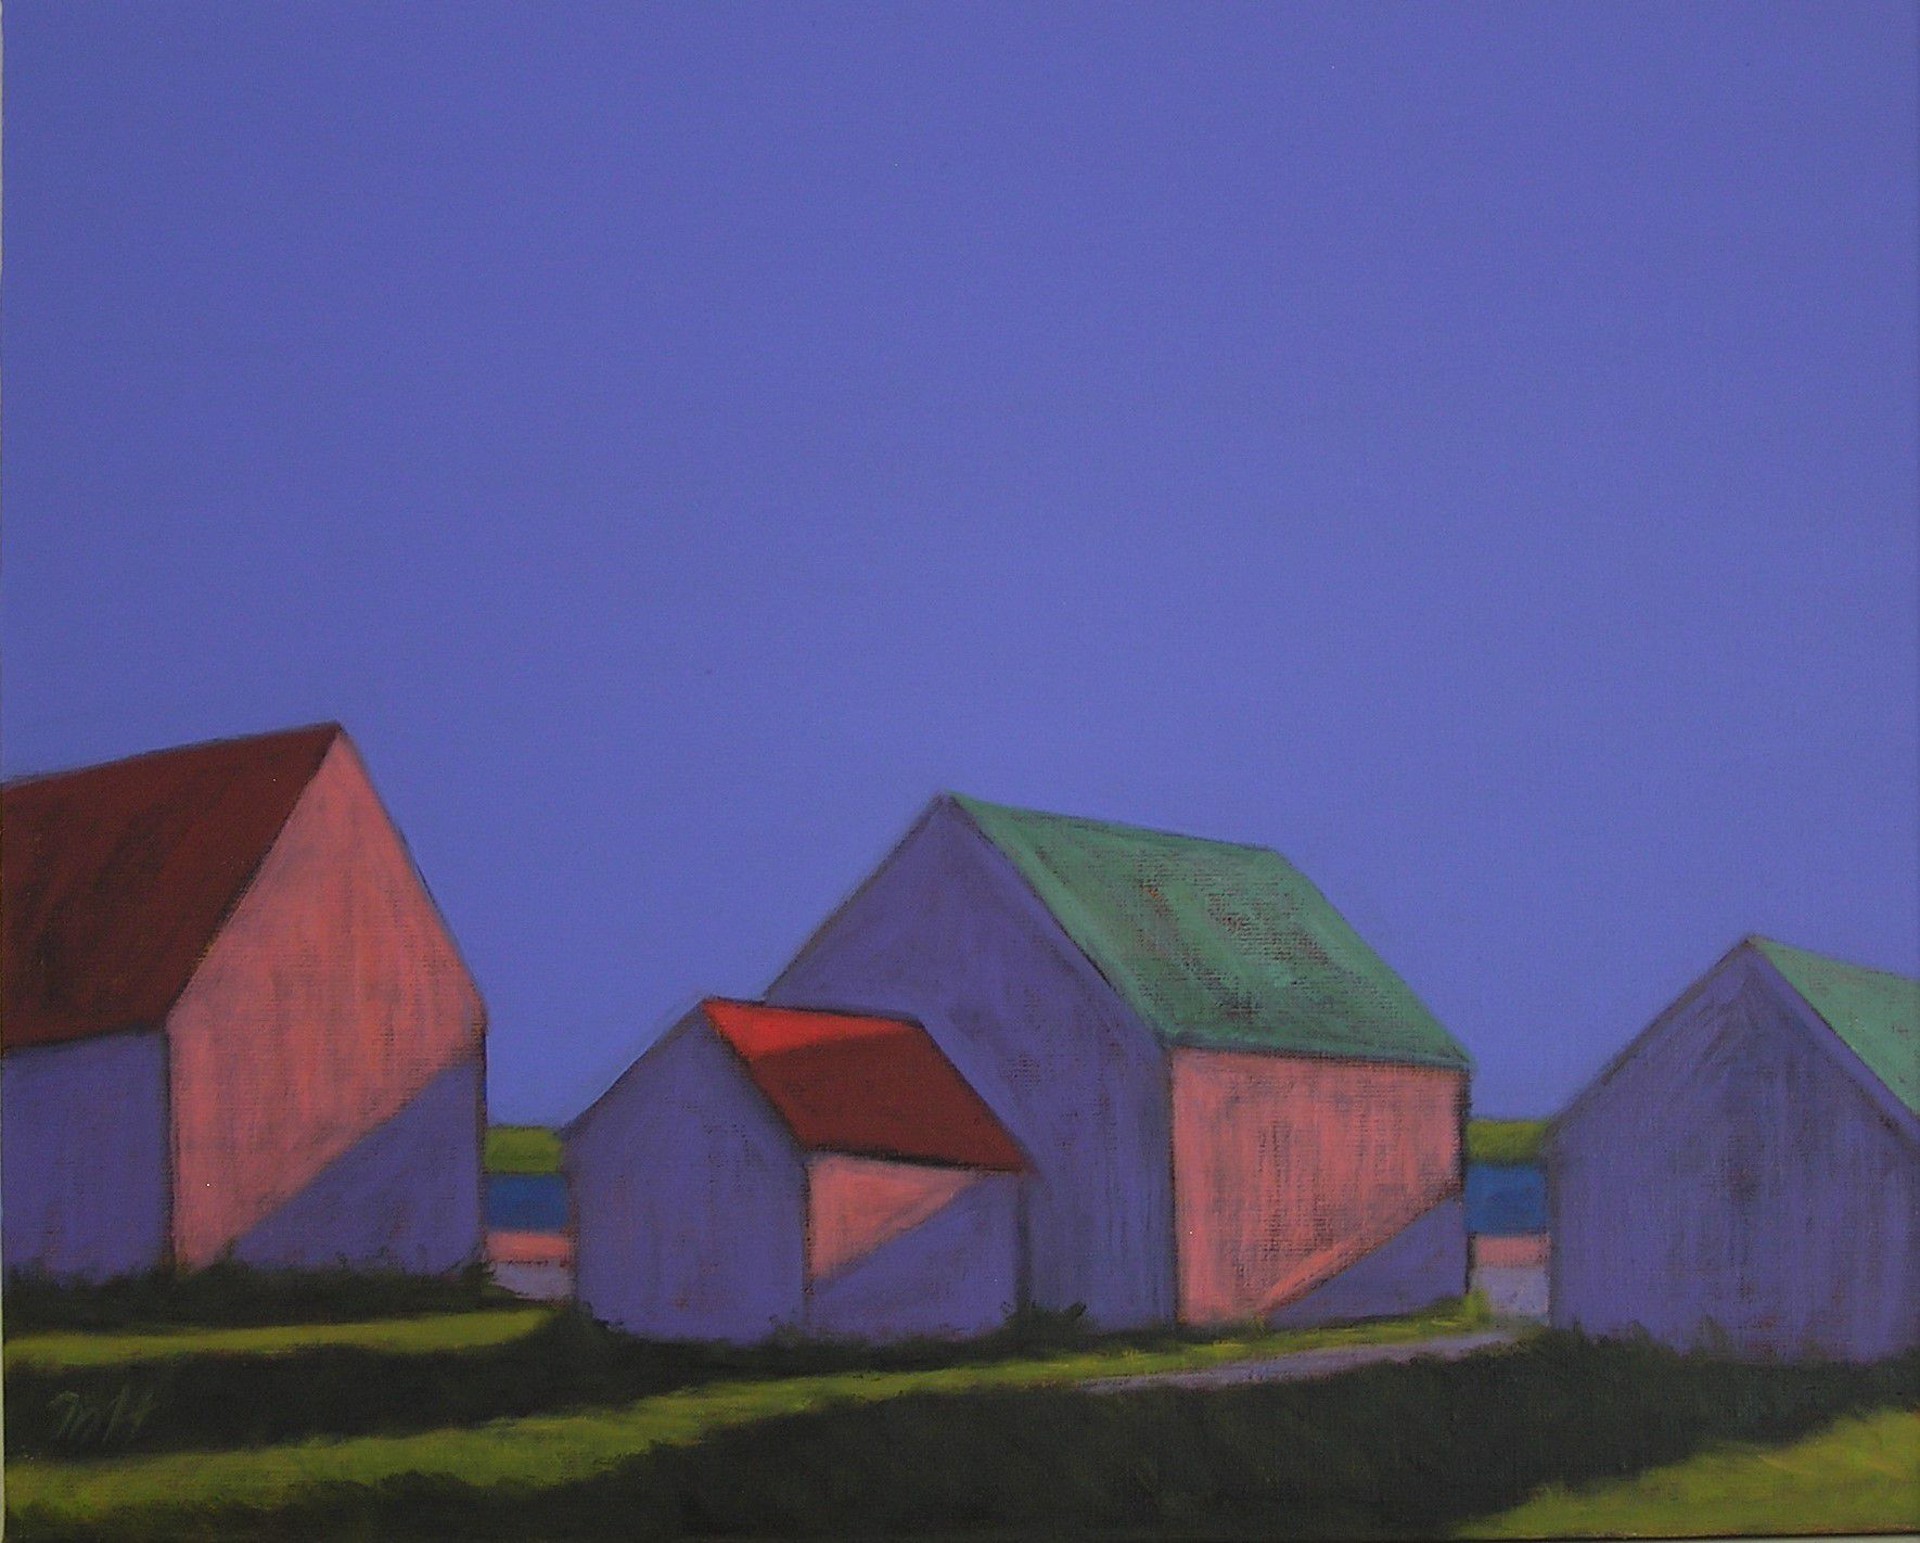 Playful Cottages by Michael Hartwig